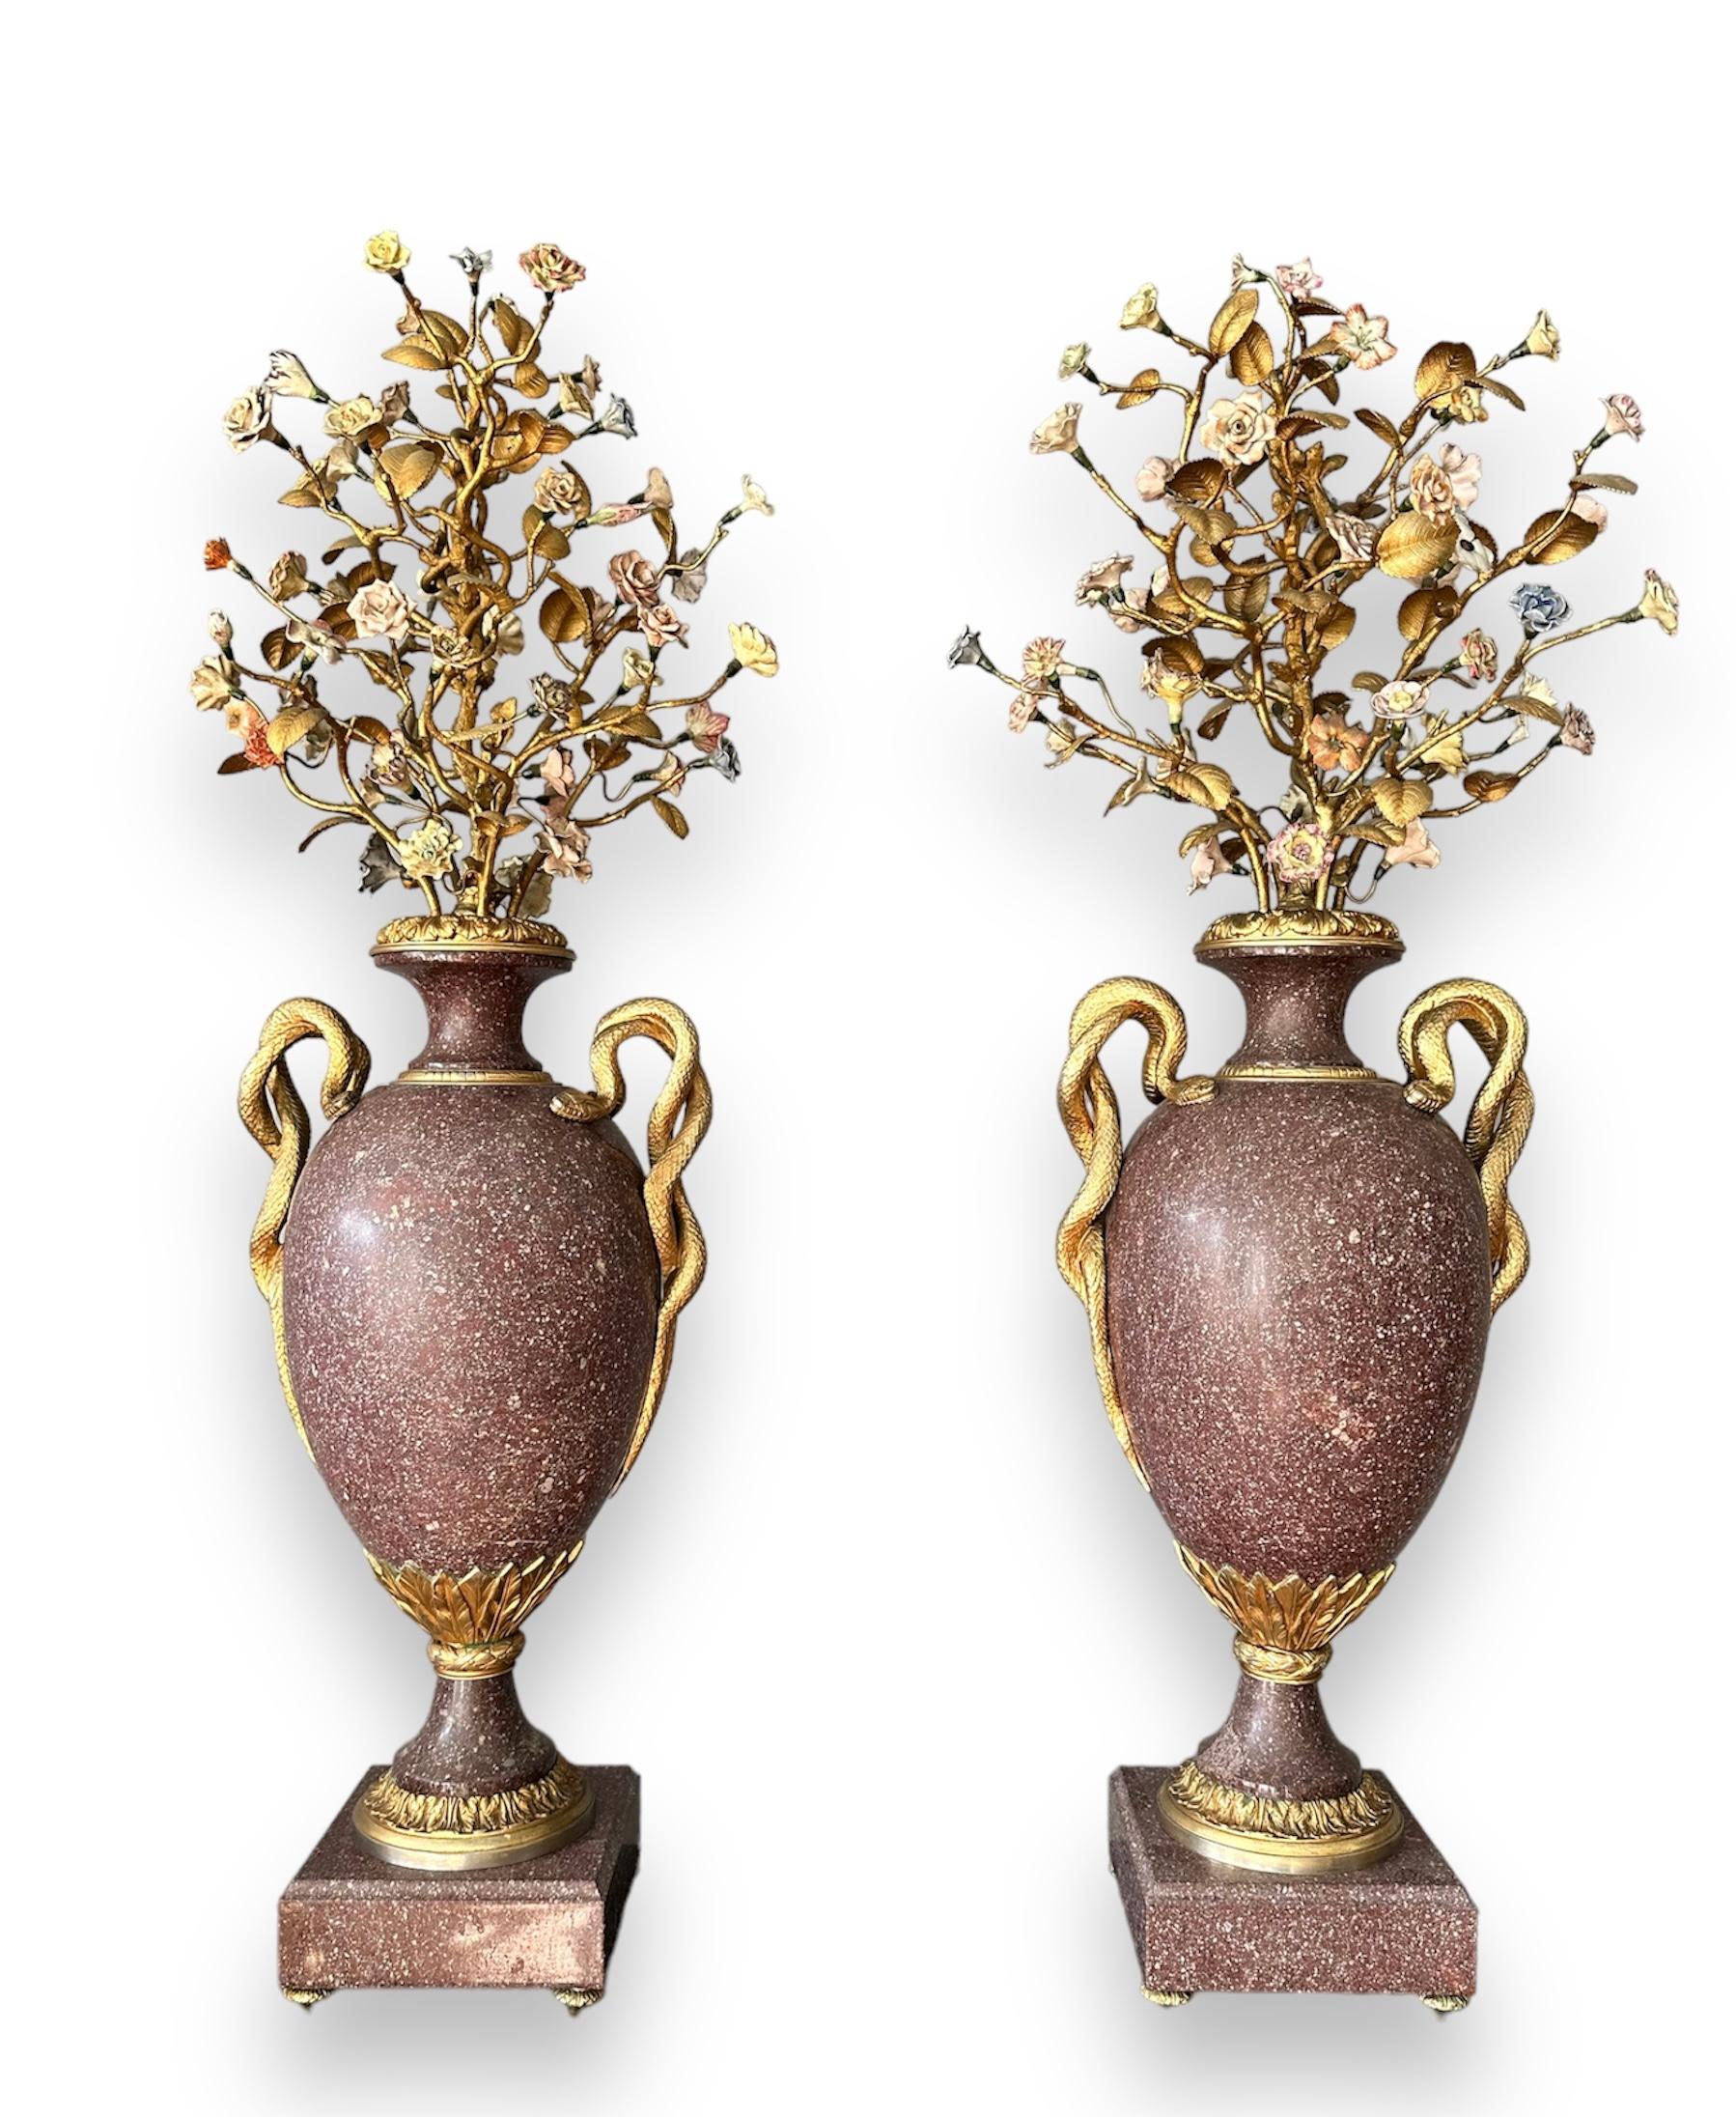 Rare and ancient pair of Egyptian porphyry vases with finely chiseled and gilded
bronze applications, in the upper part, precious gilded bronze workmanship to
compose branches and precious flowers in painted porcelain at the ends. Serpent
handles